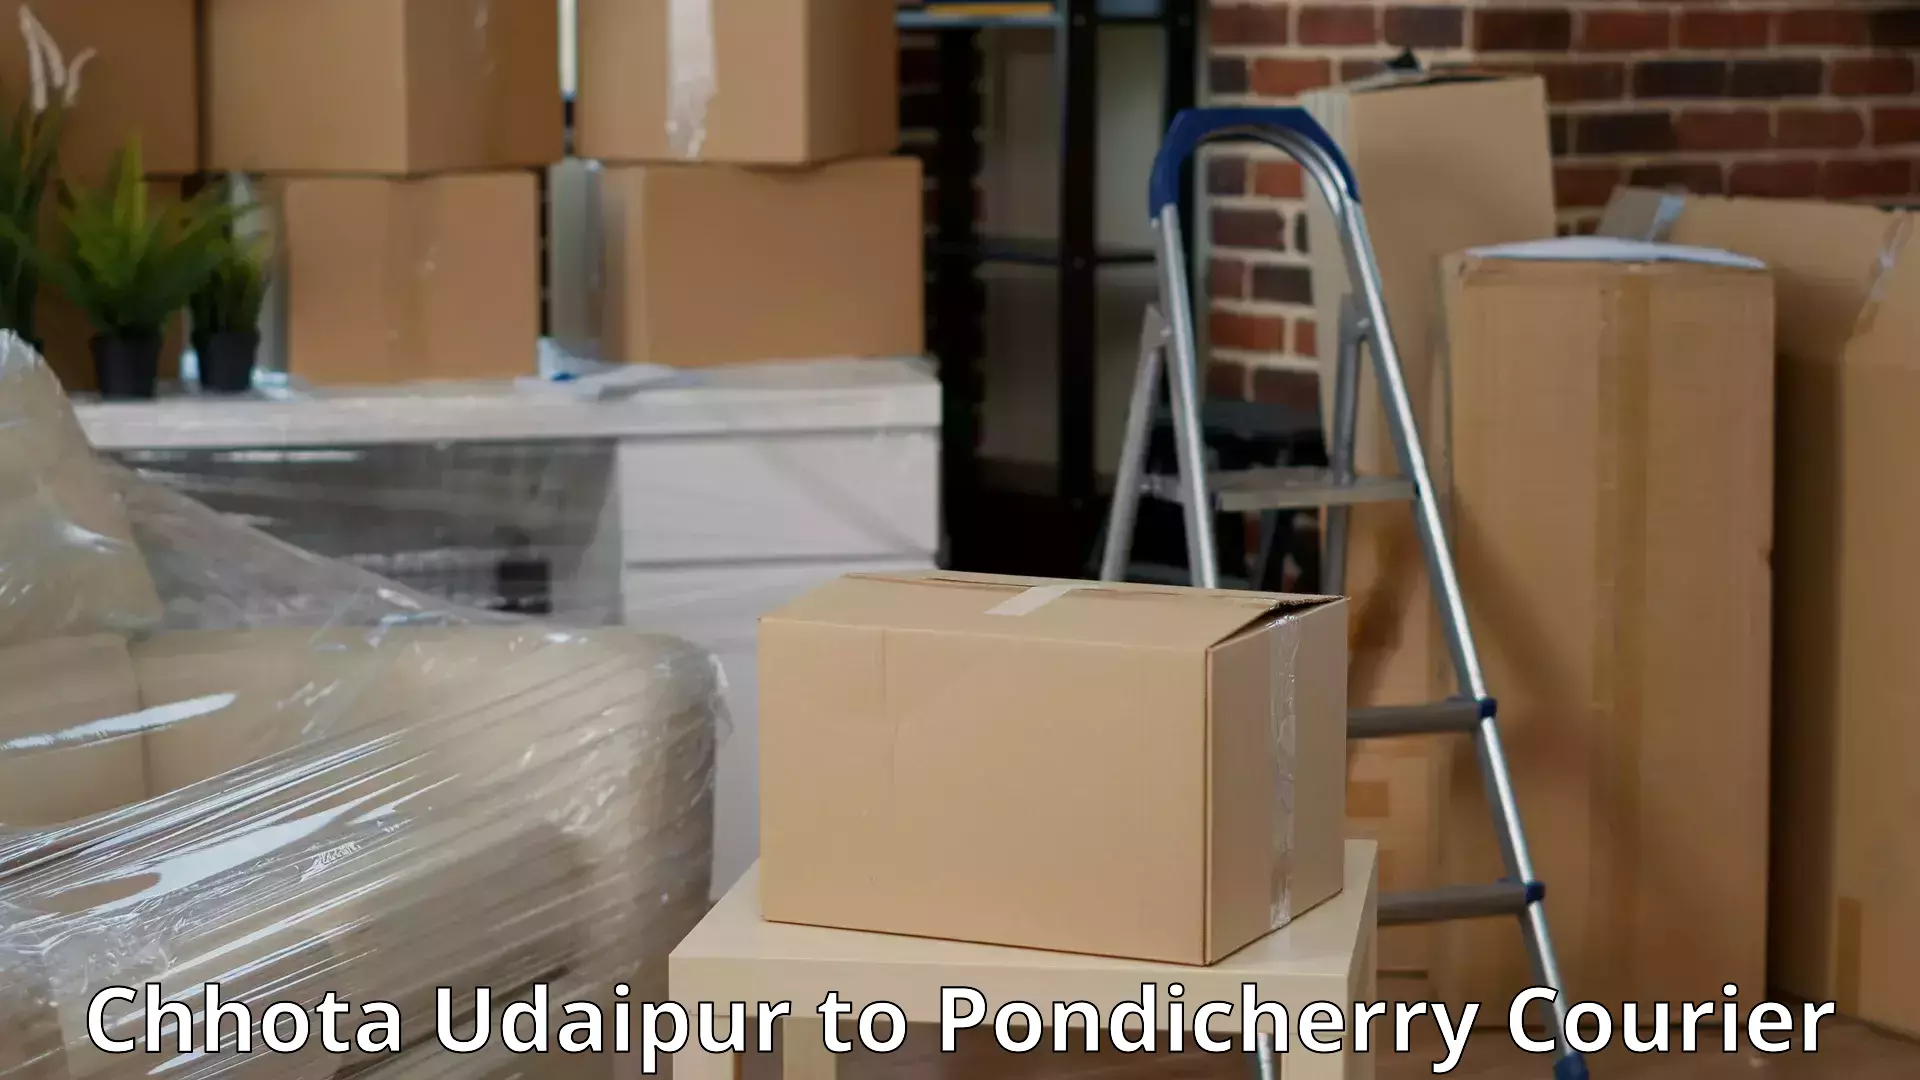 Furniture moving specialists Chhota Udaipur to Pondicherry